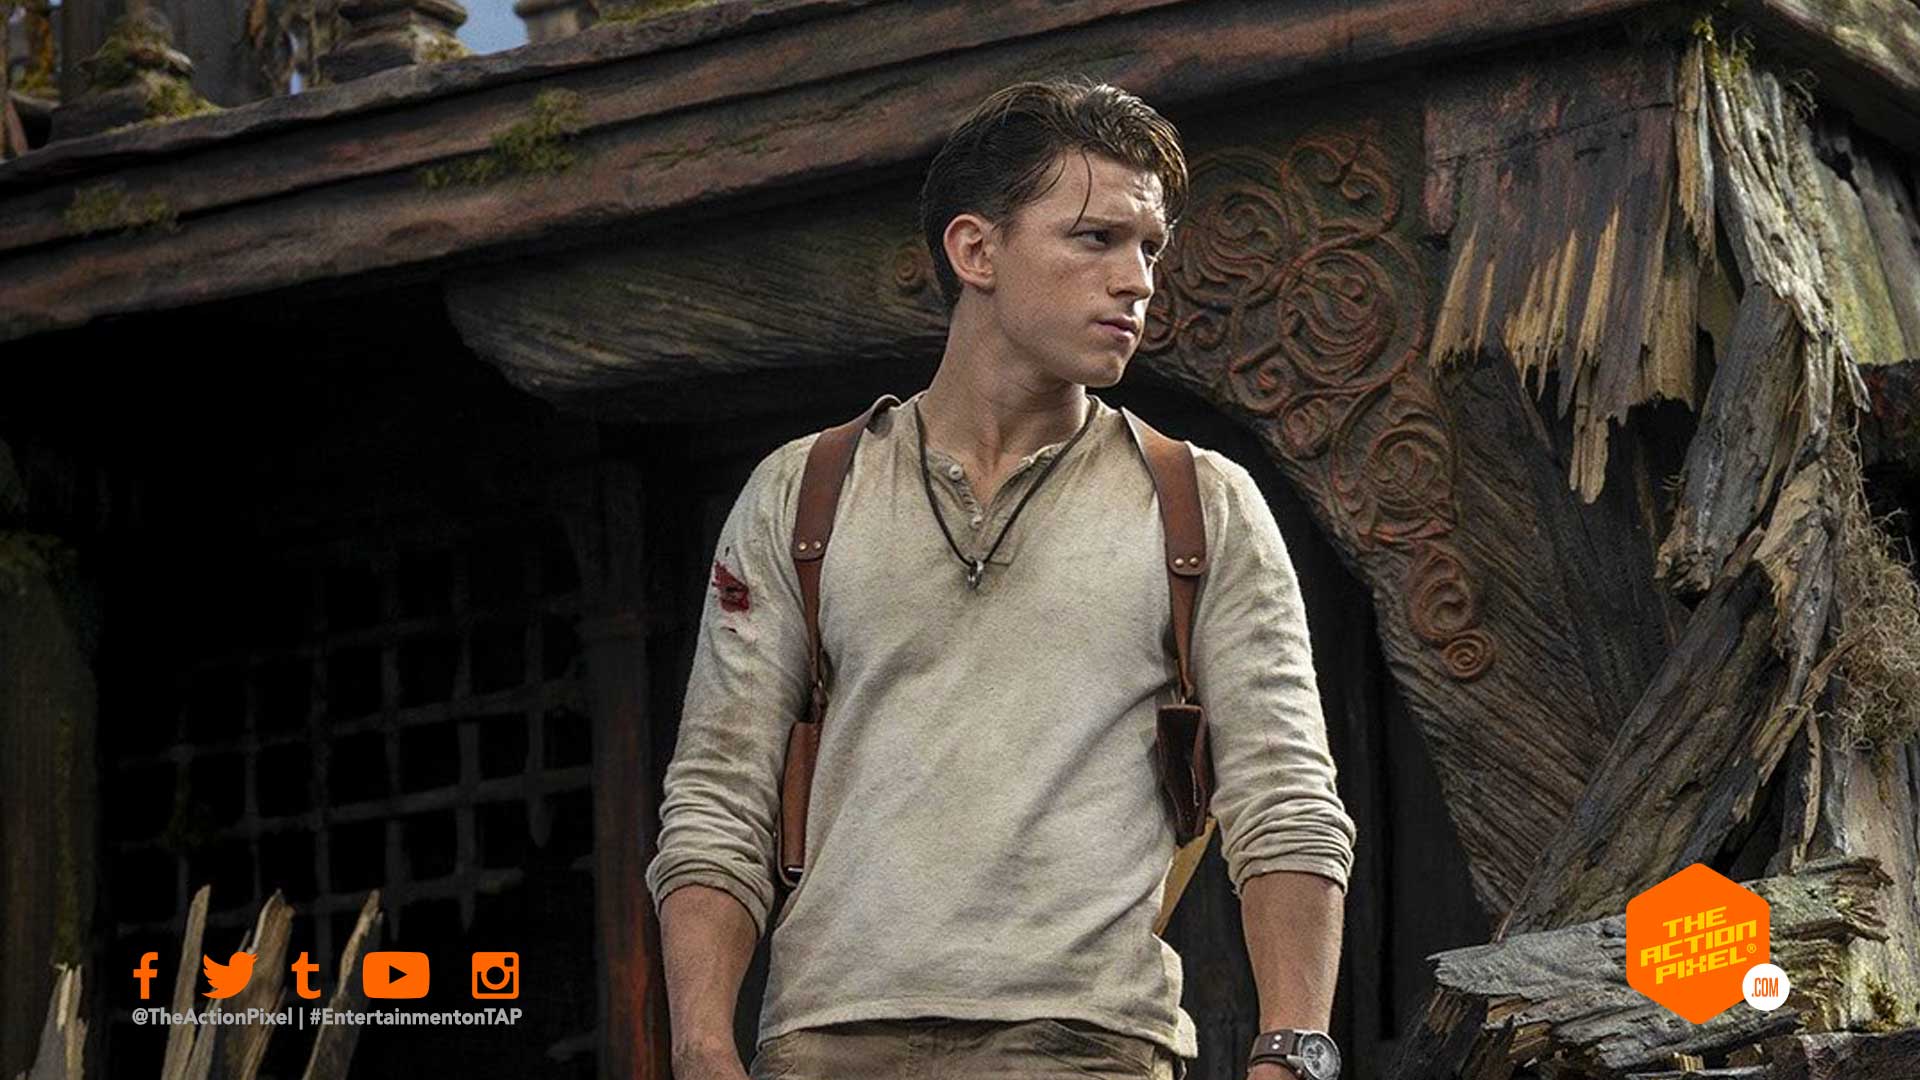 tom holland, sony, sony pictures, nathan drake, the action pixel, entertainment on tap, naughty dog, uncharted movie, uncharted, entertainment on tap, the action pixel , featured,